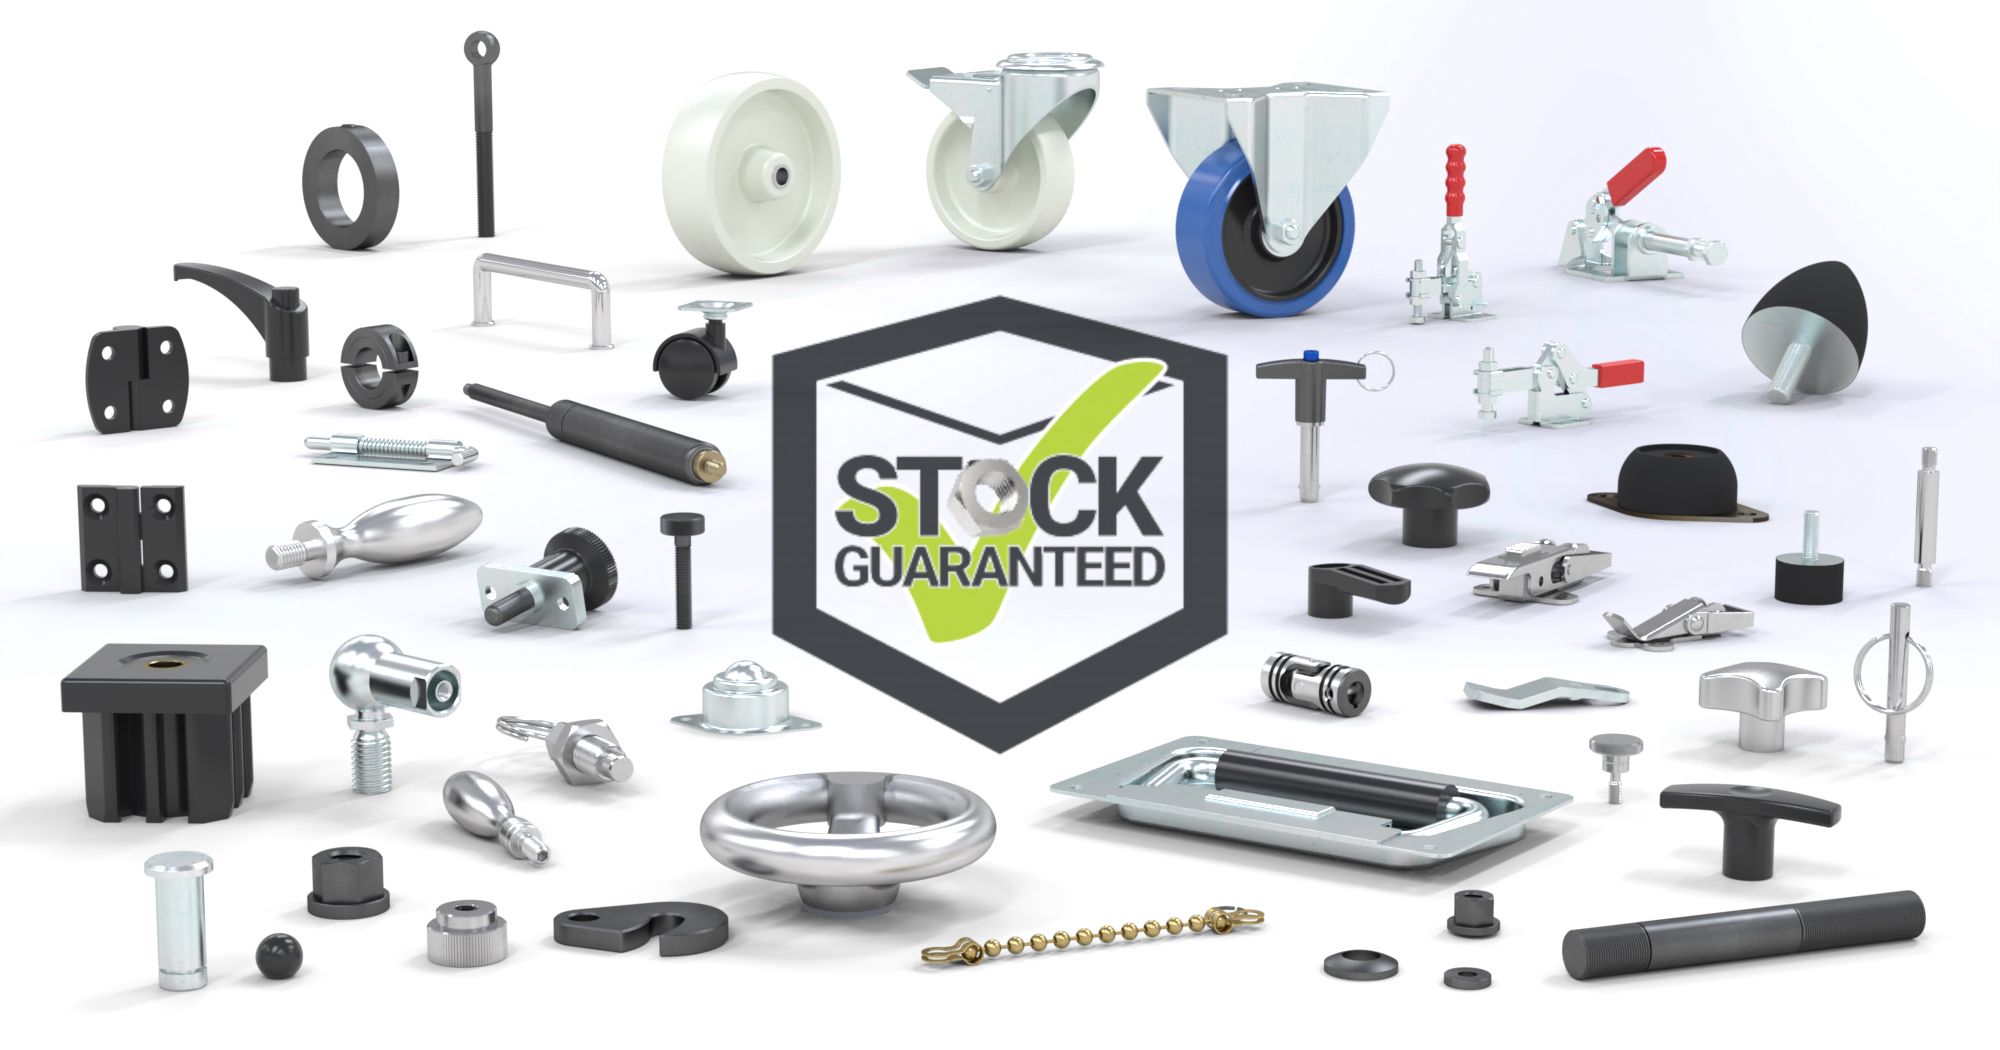 Stock Guaranteed - Overcoming the standard parts and components stock shortage